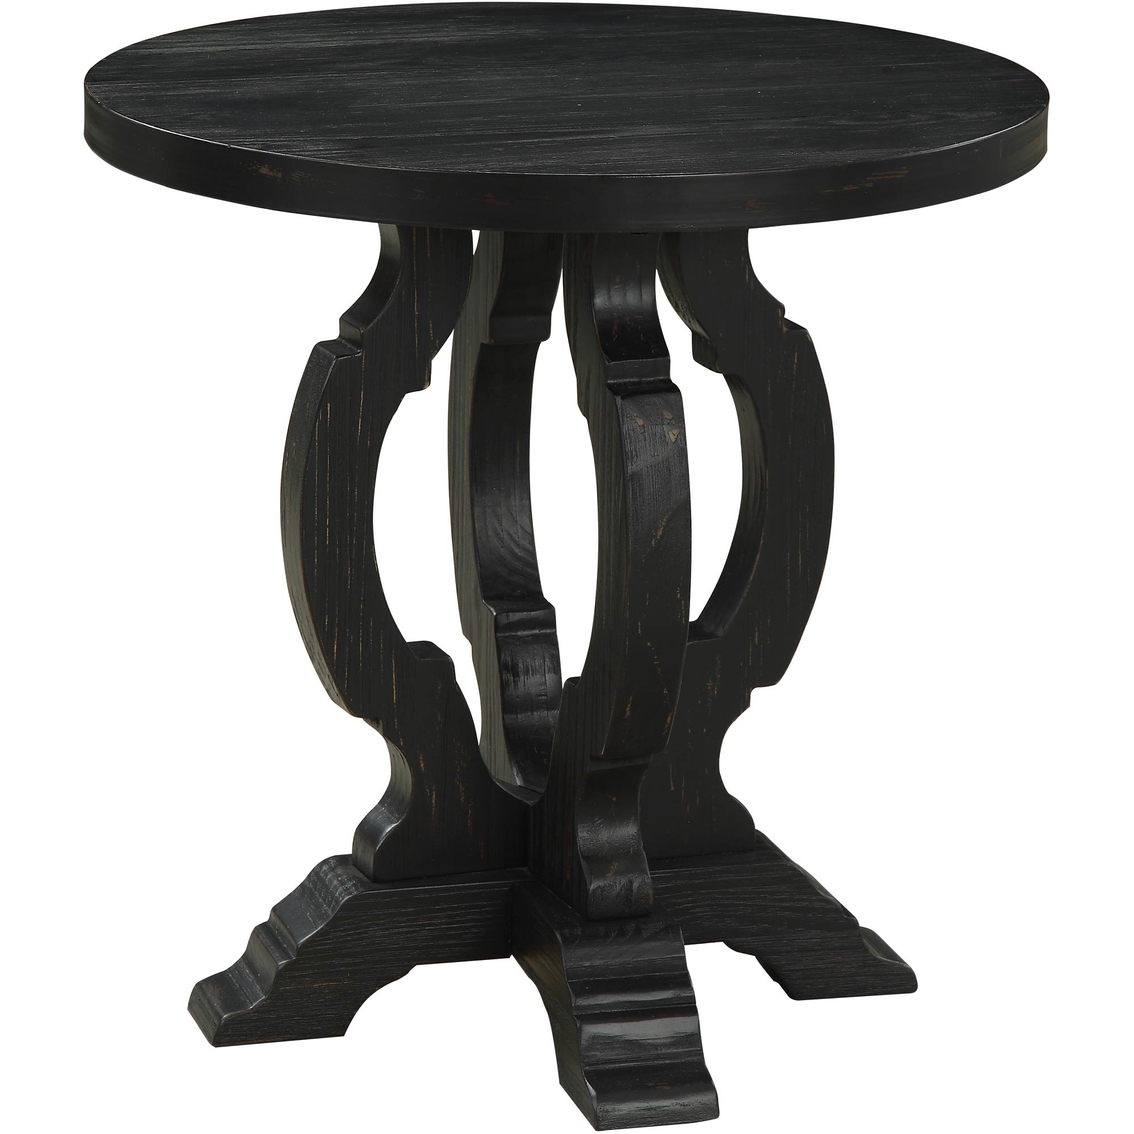 enchanting round black metal accent table outdoor small antique pedestal white dining half patio and distressed end garden classic full size rustic wood pub style set vintage